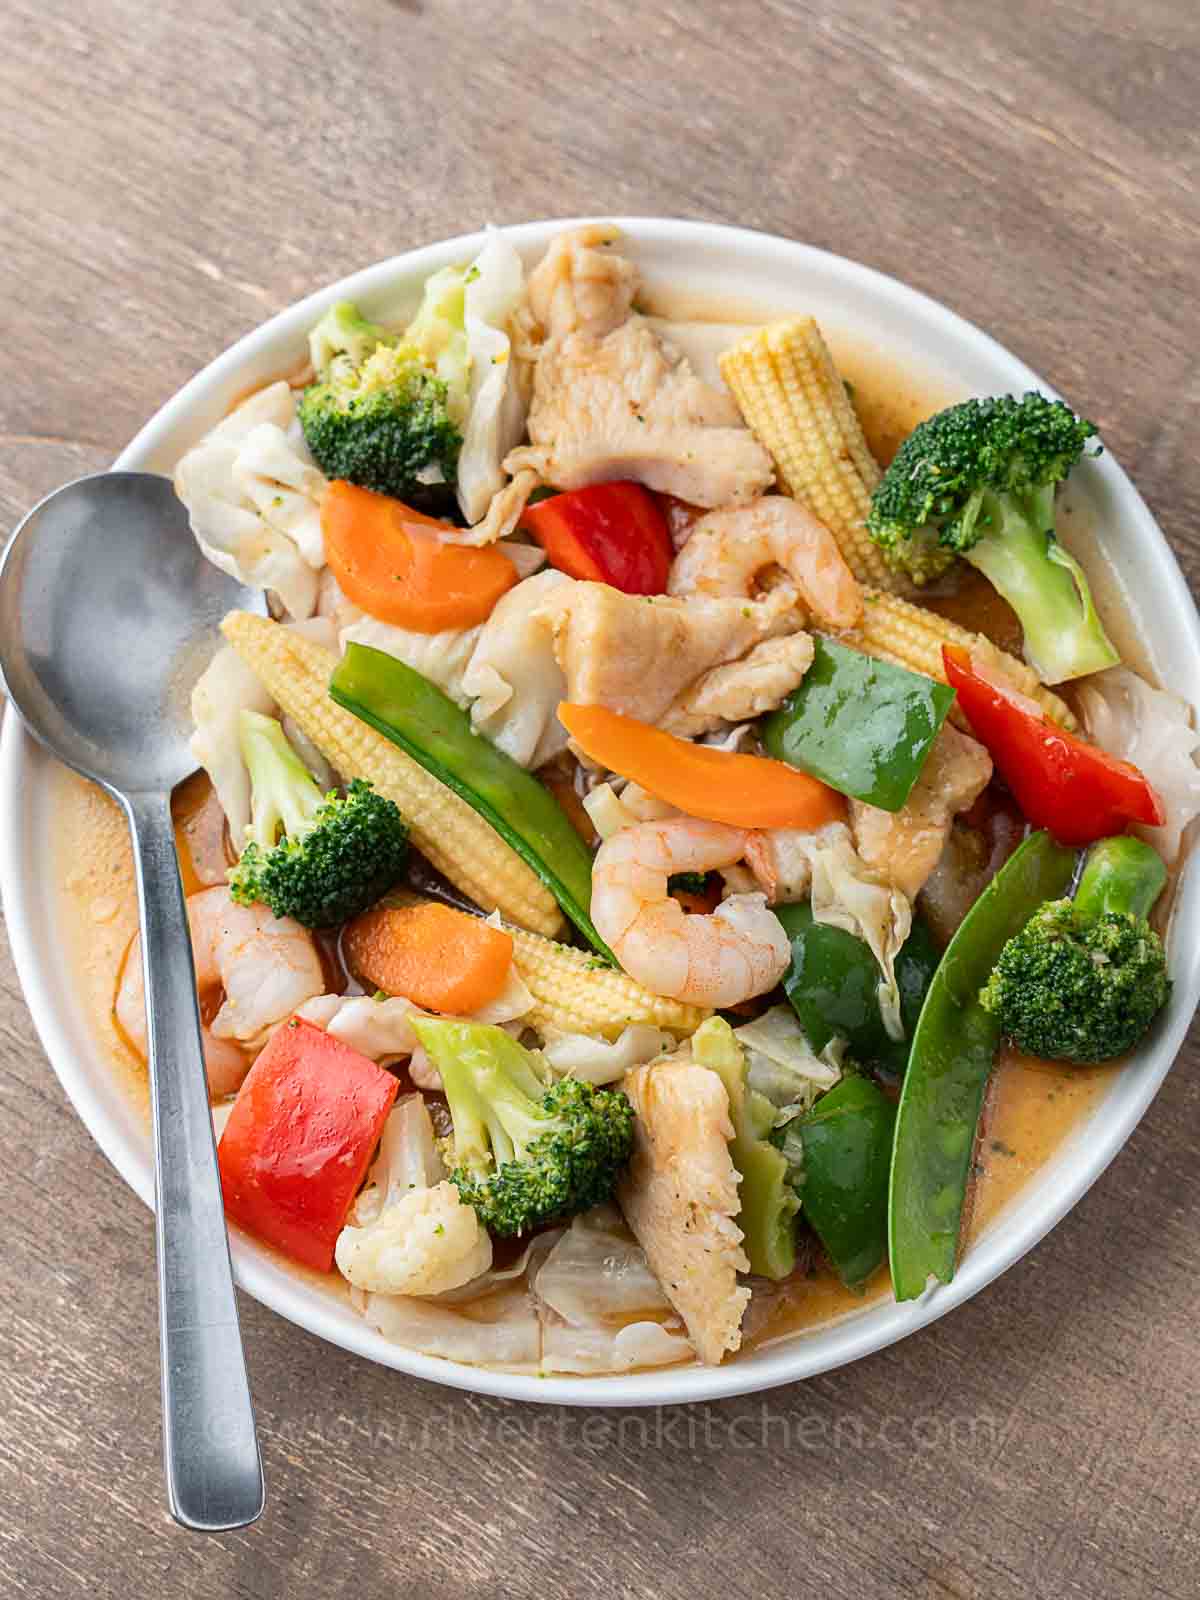 Filipino vegetable stir-fry called chop suey made with shrimp, chicken, cabbage, baby corn, broccoli, cauliflower and bell peppers.